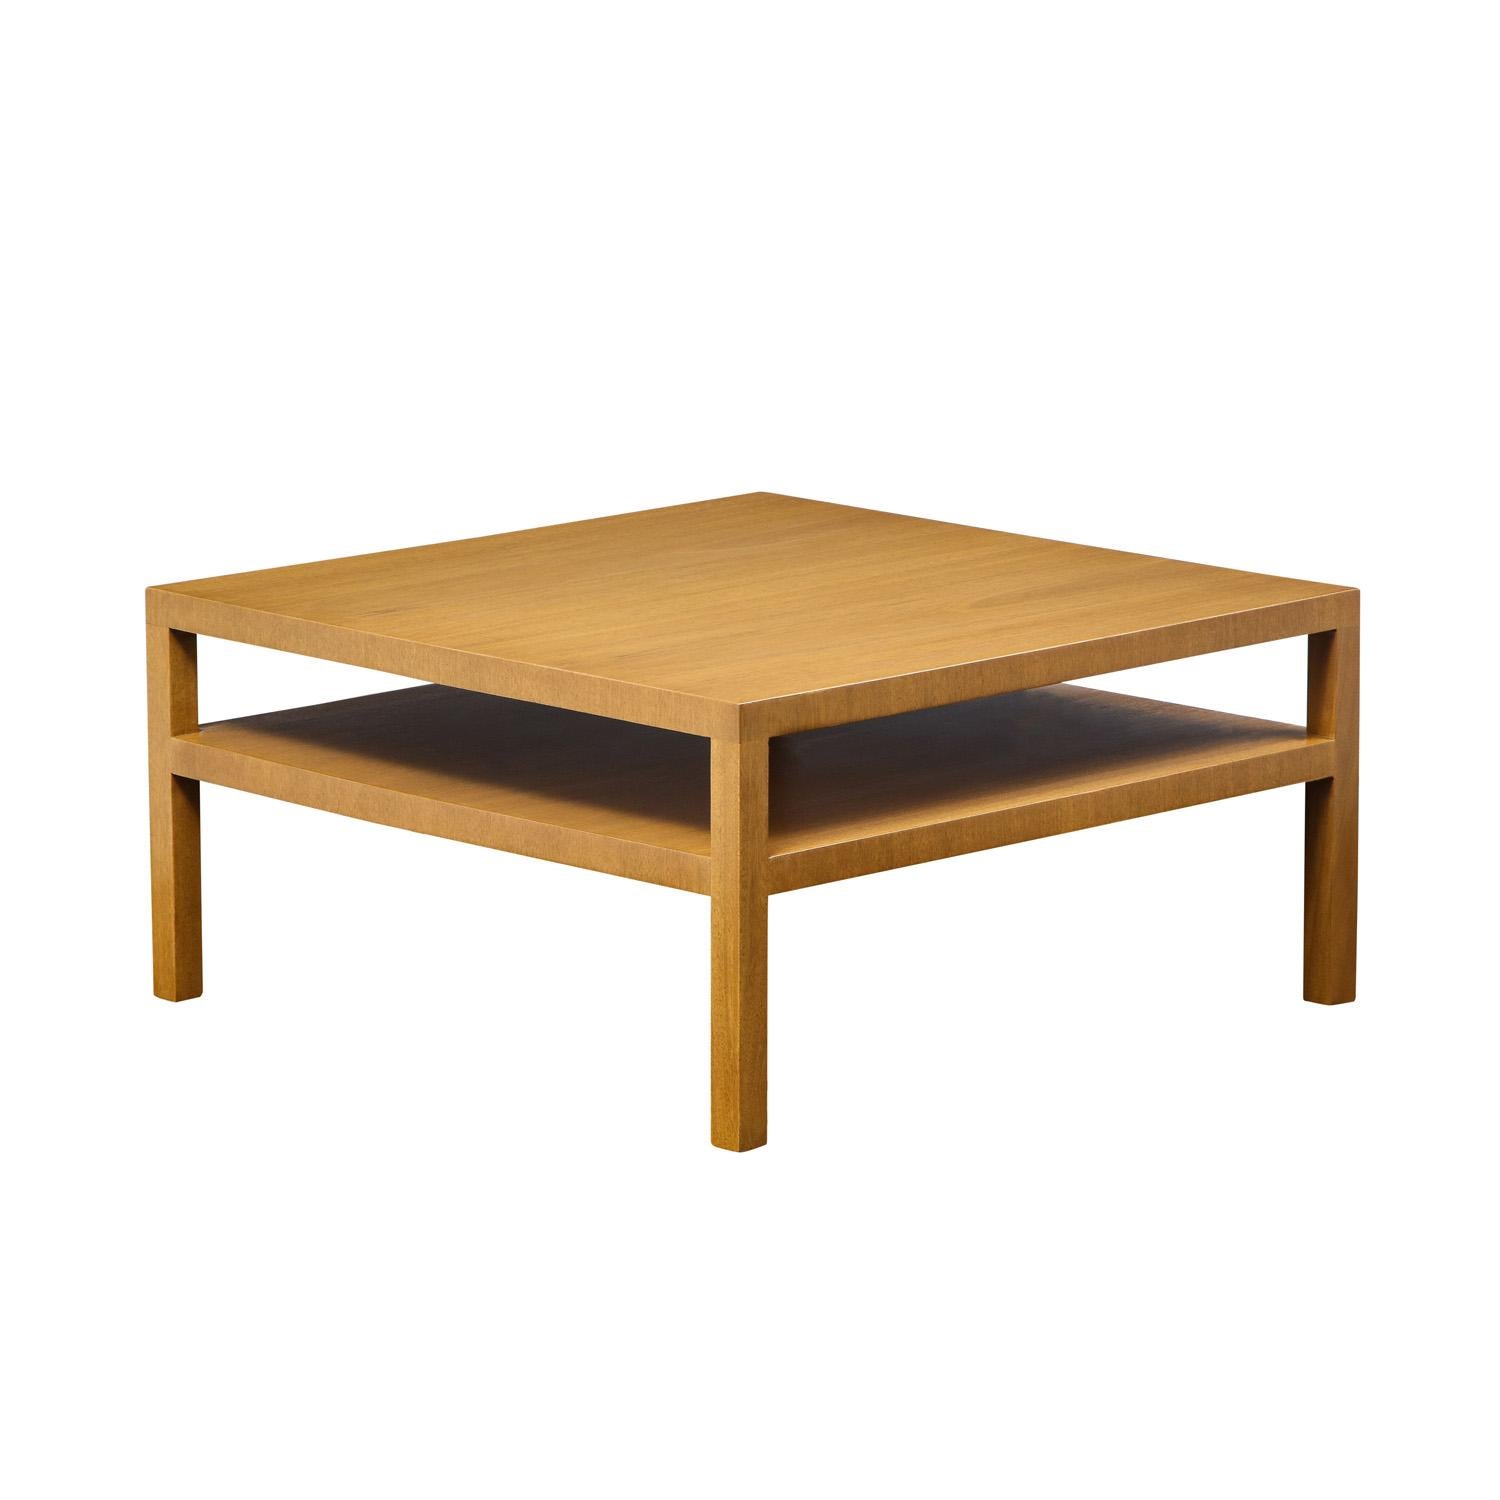 Square 2-tier coffee table in walnut by T.H. Robsjohn-Gibbings for Widdicomb, American 1940's (label on bottom). Newly refinished by Lobel Modern. This clean-line coffee table is very elegant and would add beauty to any interior.